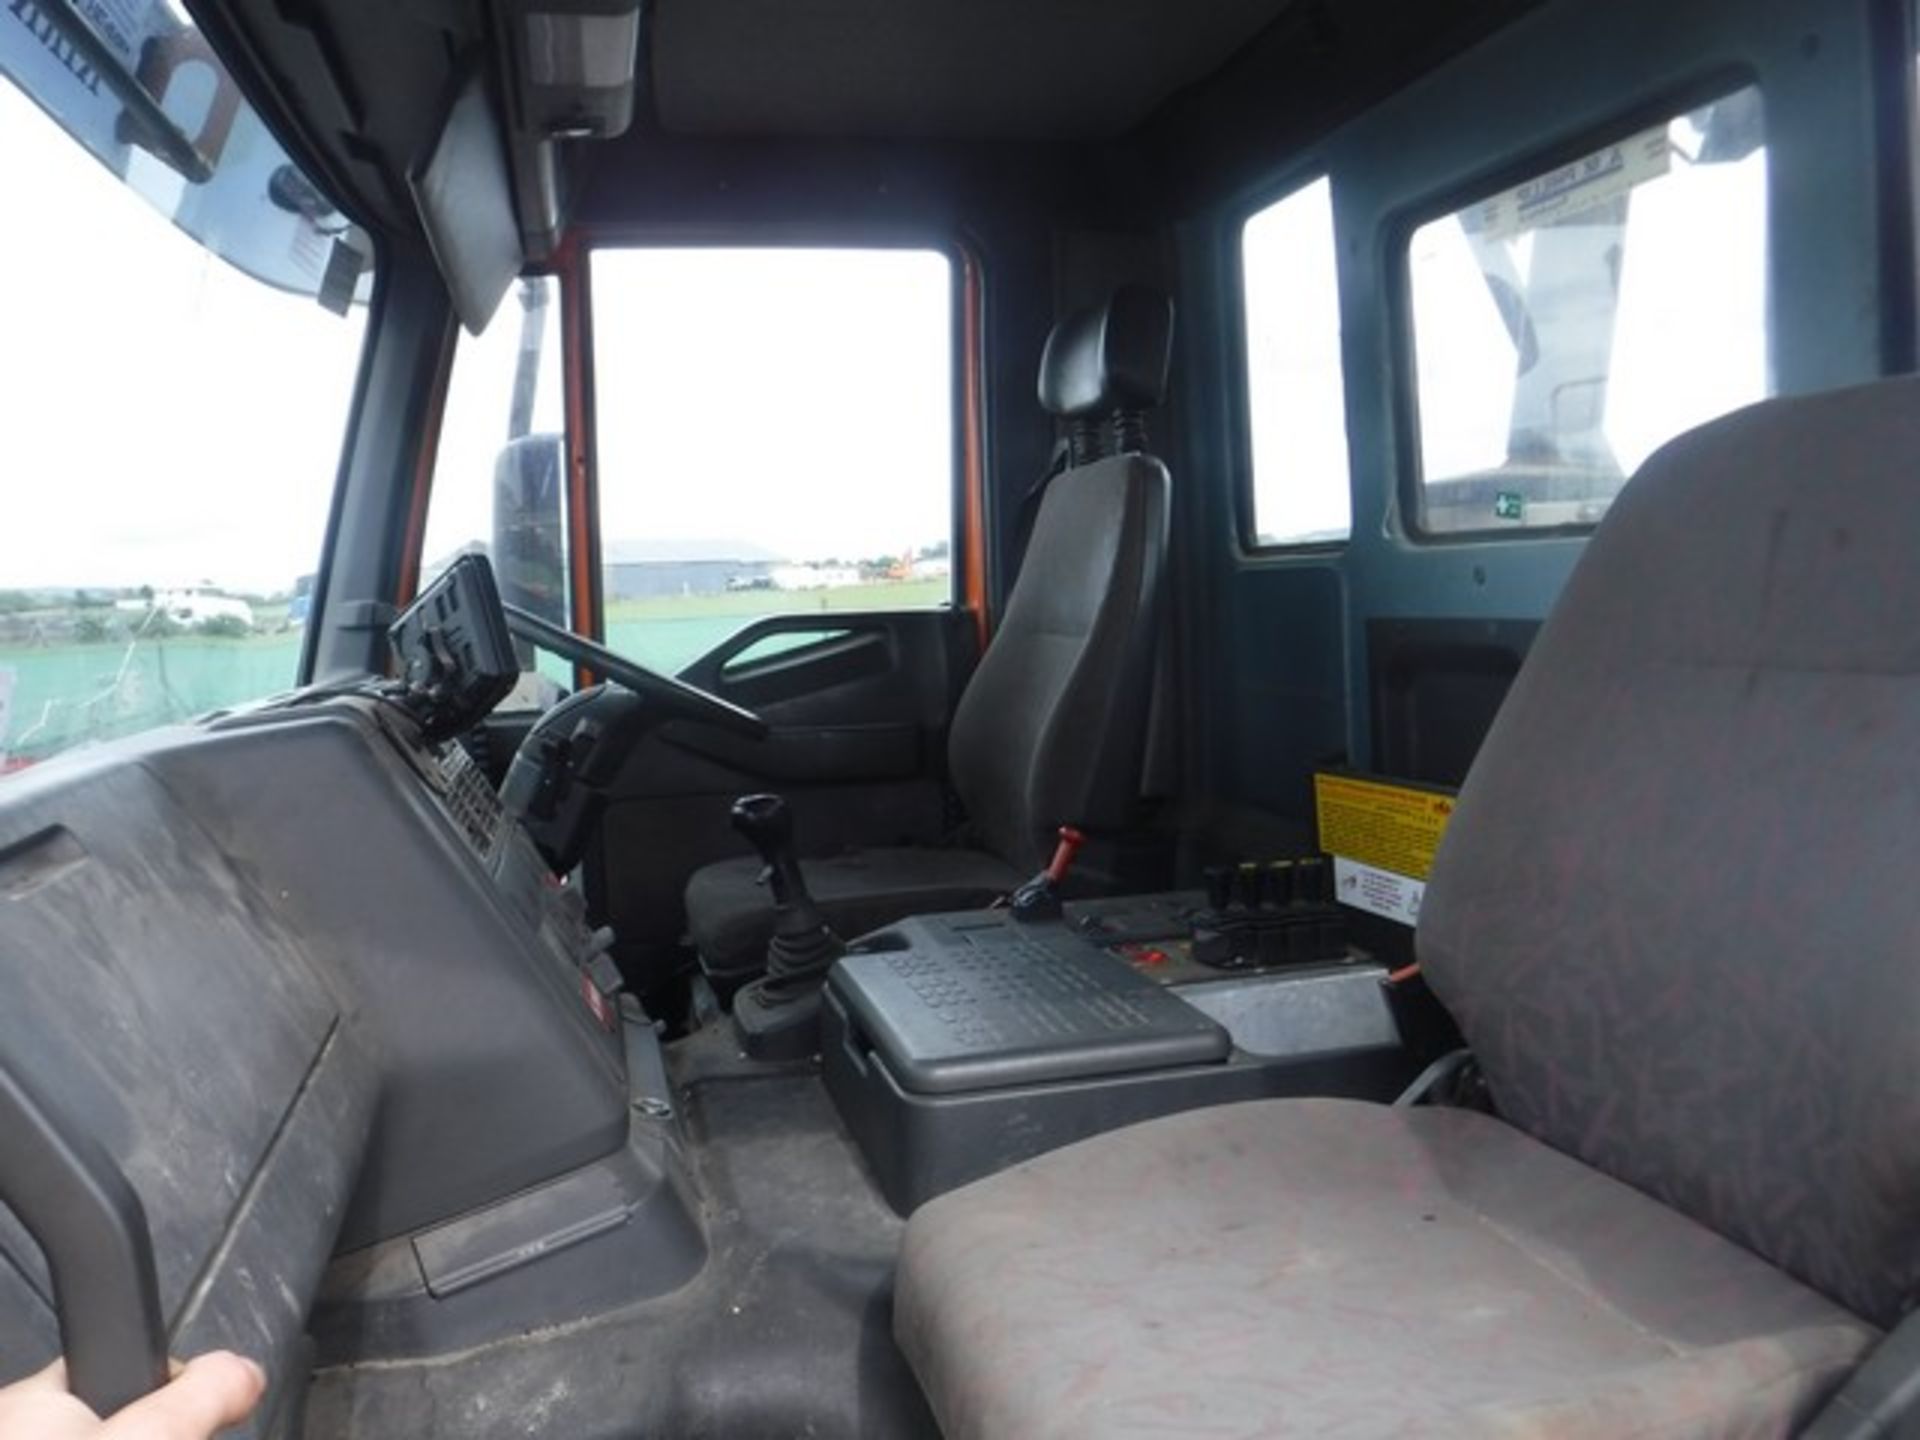 IVECO DAILY 50C15 3.5WB - 7790cc - Image 6 of 41